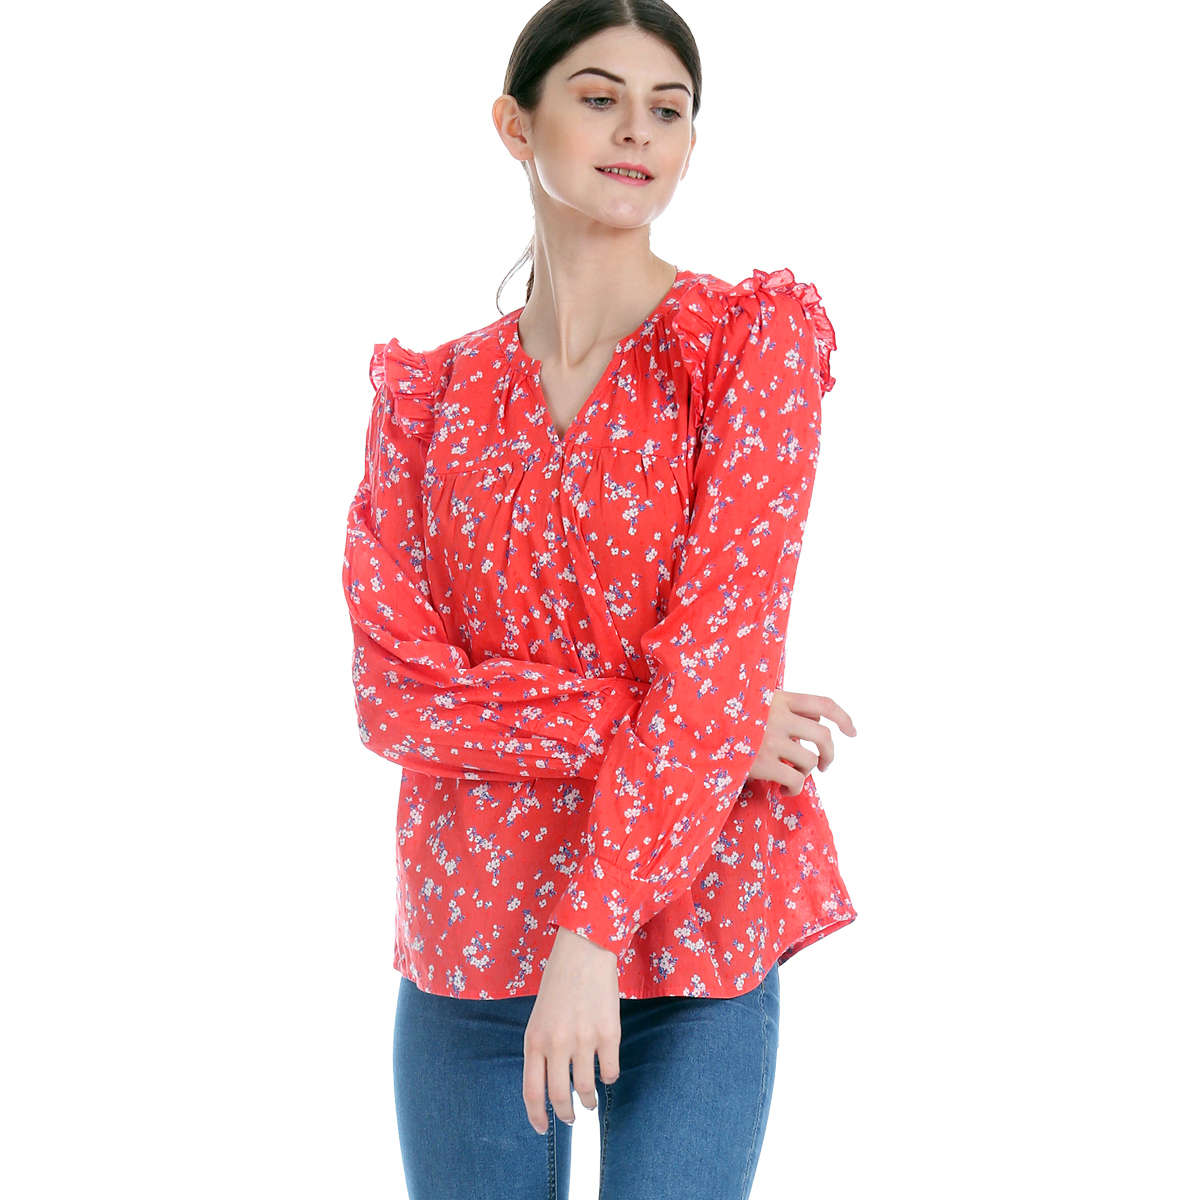 Gap Floral Printed Notch Round Neck Full Sleeve Top with Pleating details All Over - Coral